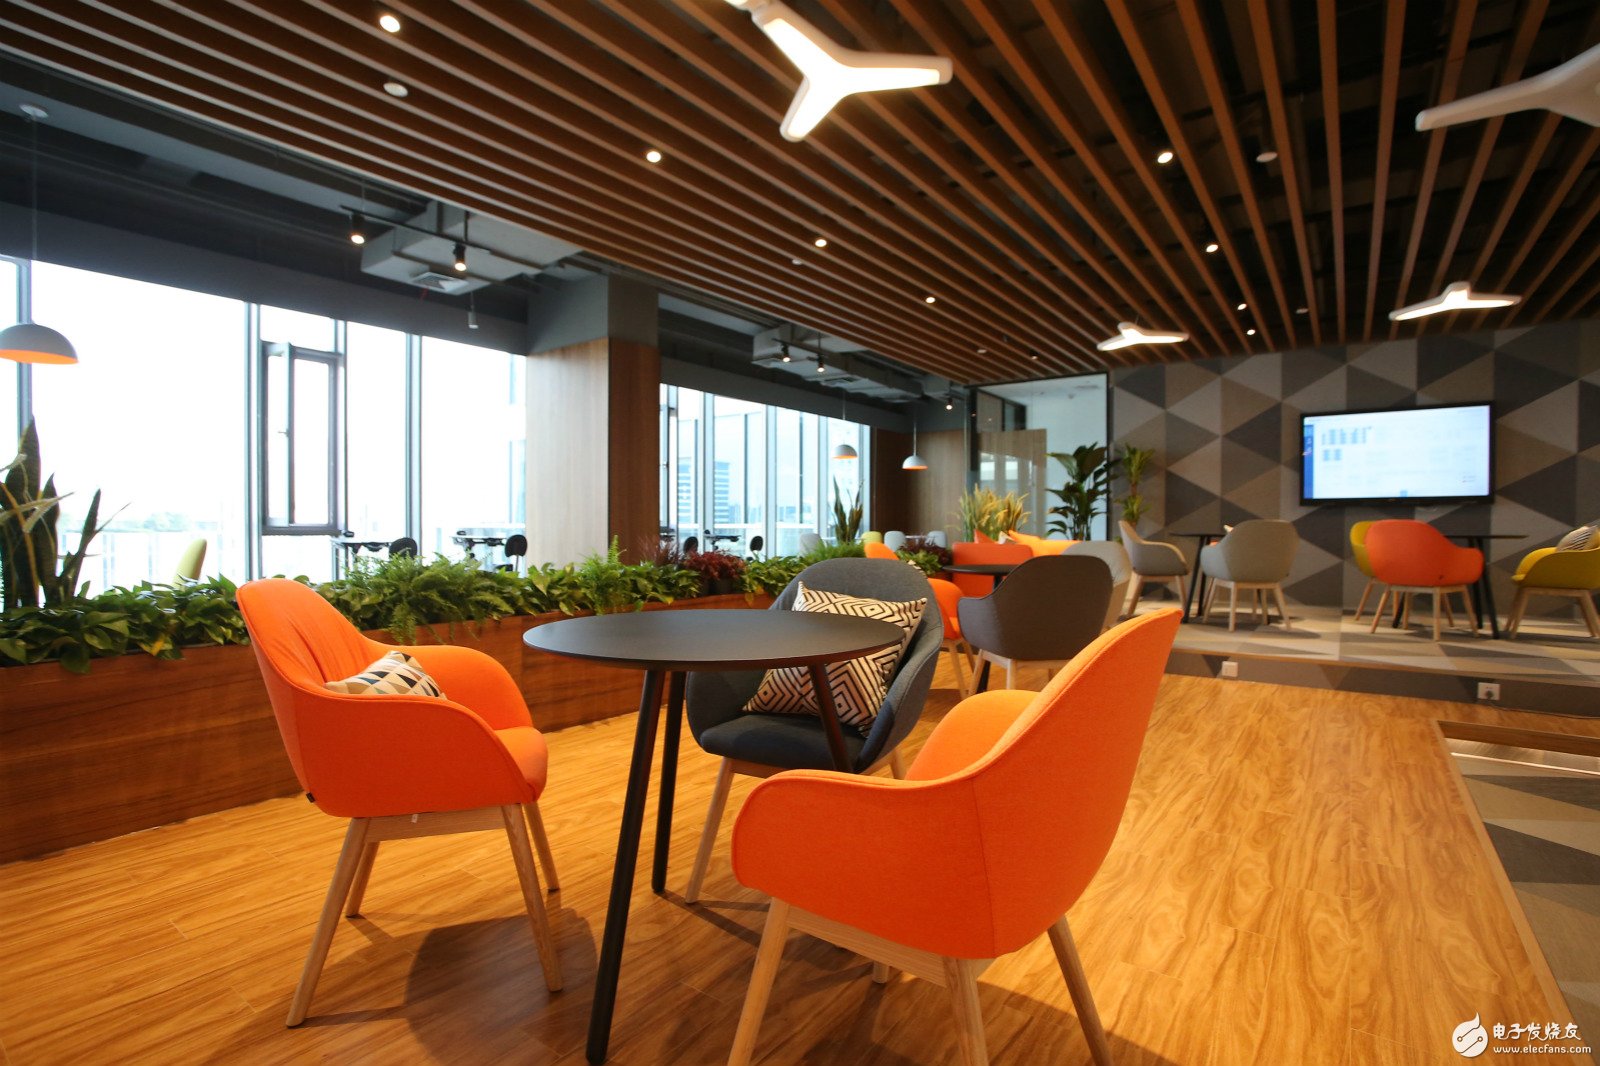 Philips Lighting changed its name to æ˜•è¯ºé£ž, and the new office building showed all aspects of IoT lighting.